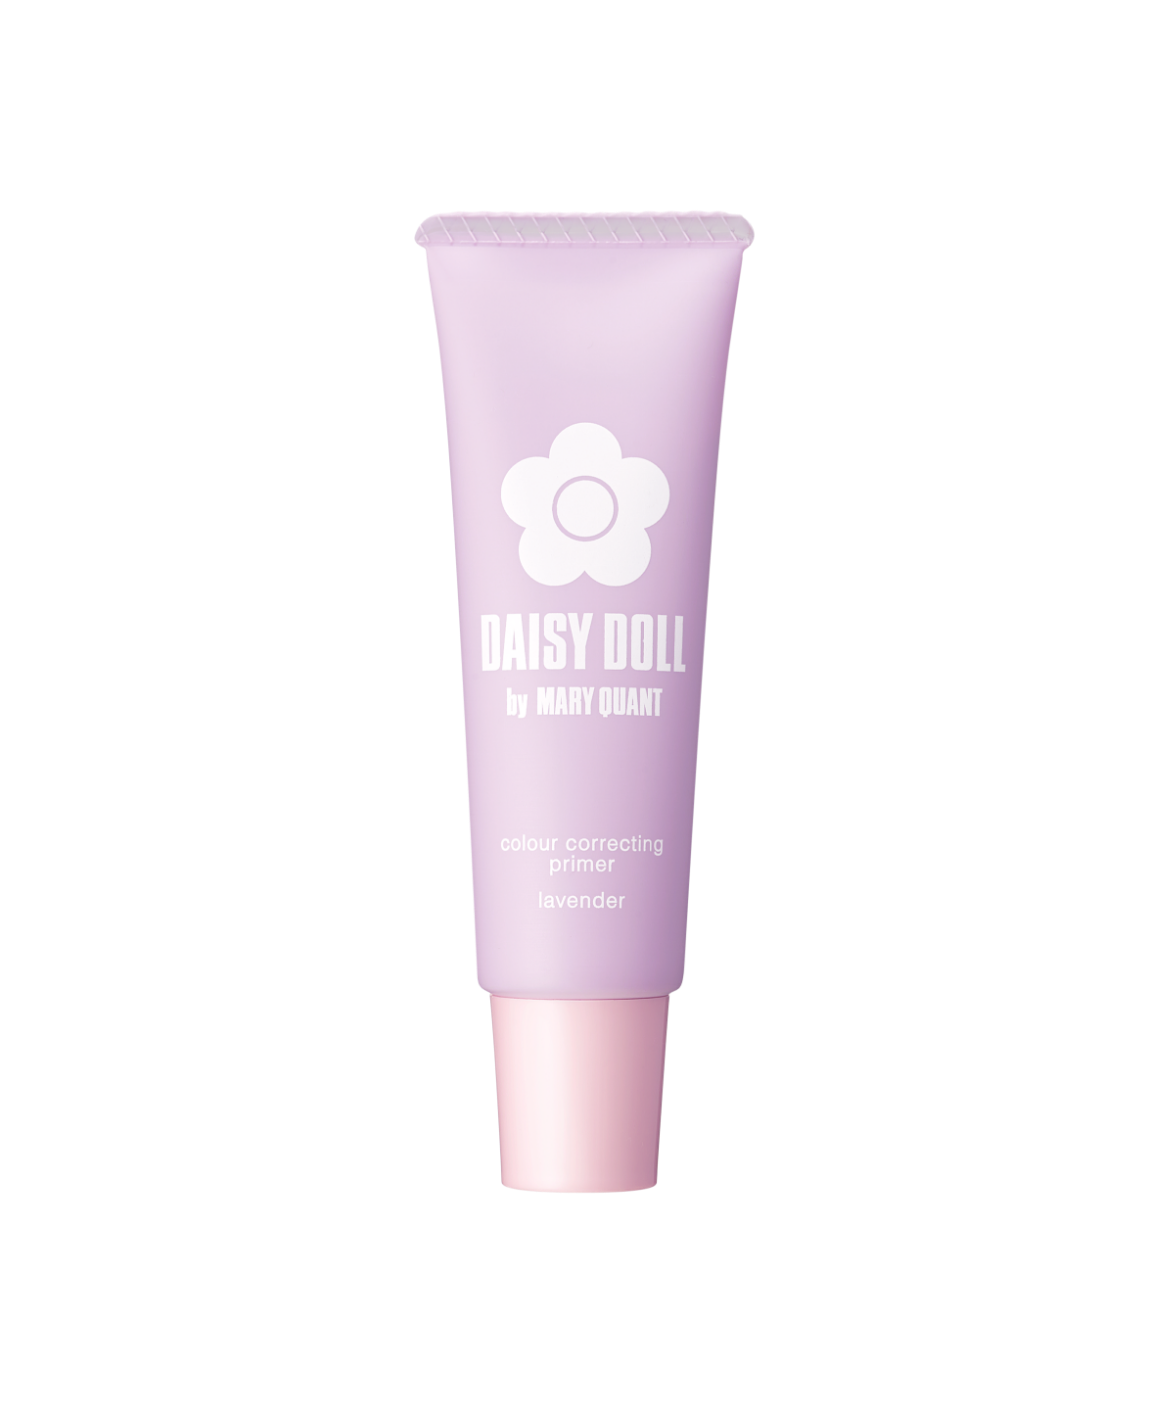 DAISY DOLL by MARY QUANT Color Correcting Primer 買物課 KAIMONOKA 日本 代購 連線 香港 ALL PRODUCTS DAISY DOLL MAKE UP BASE MAKEUP MAKEUP BASE MARY QUANT PRIMER 底妝 底霜 打底 調色 隔離